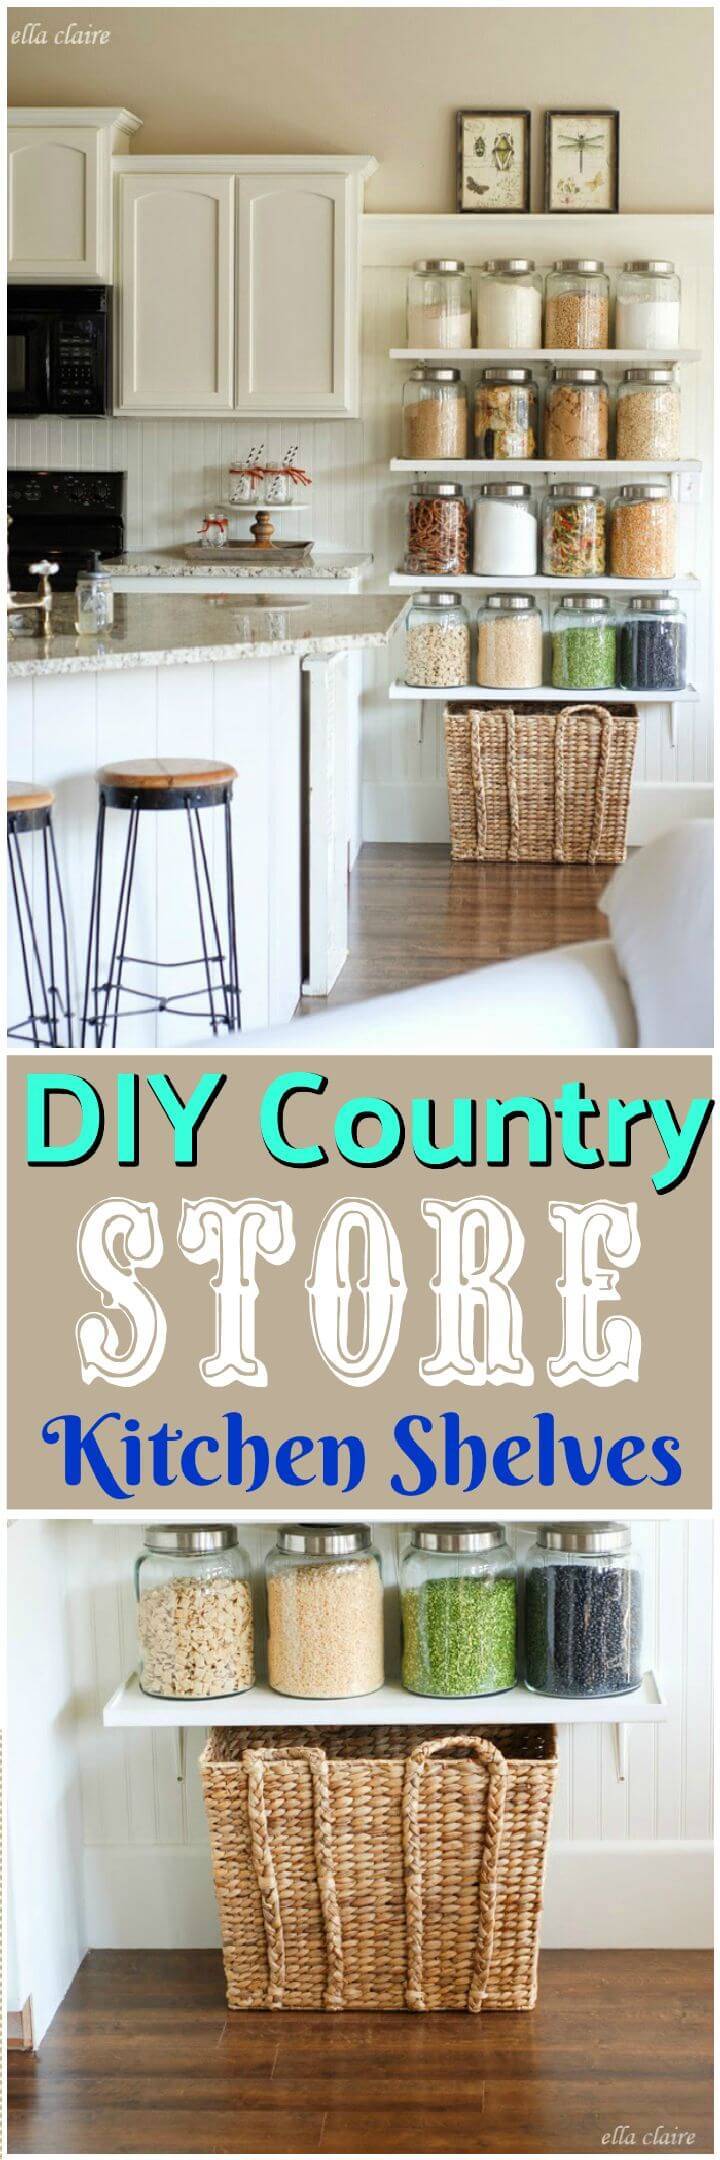 DIY Country Store Kitchen Shelves